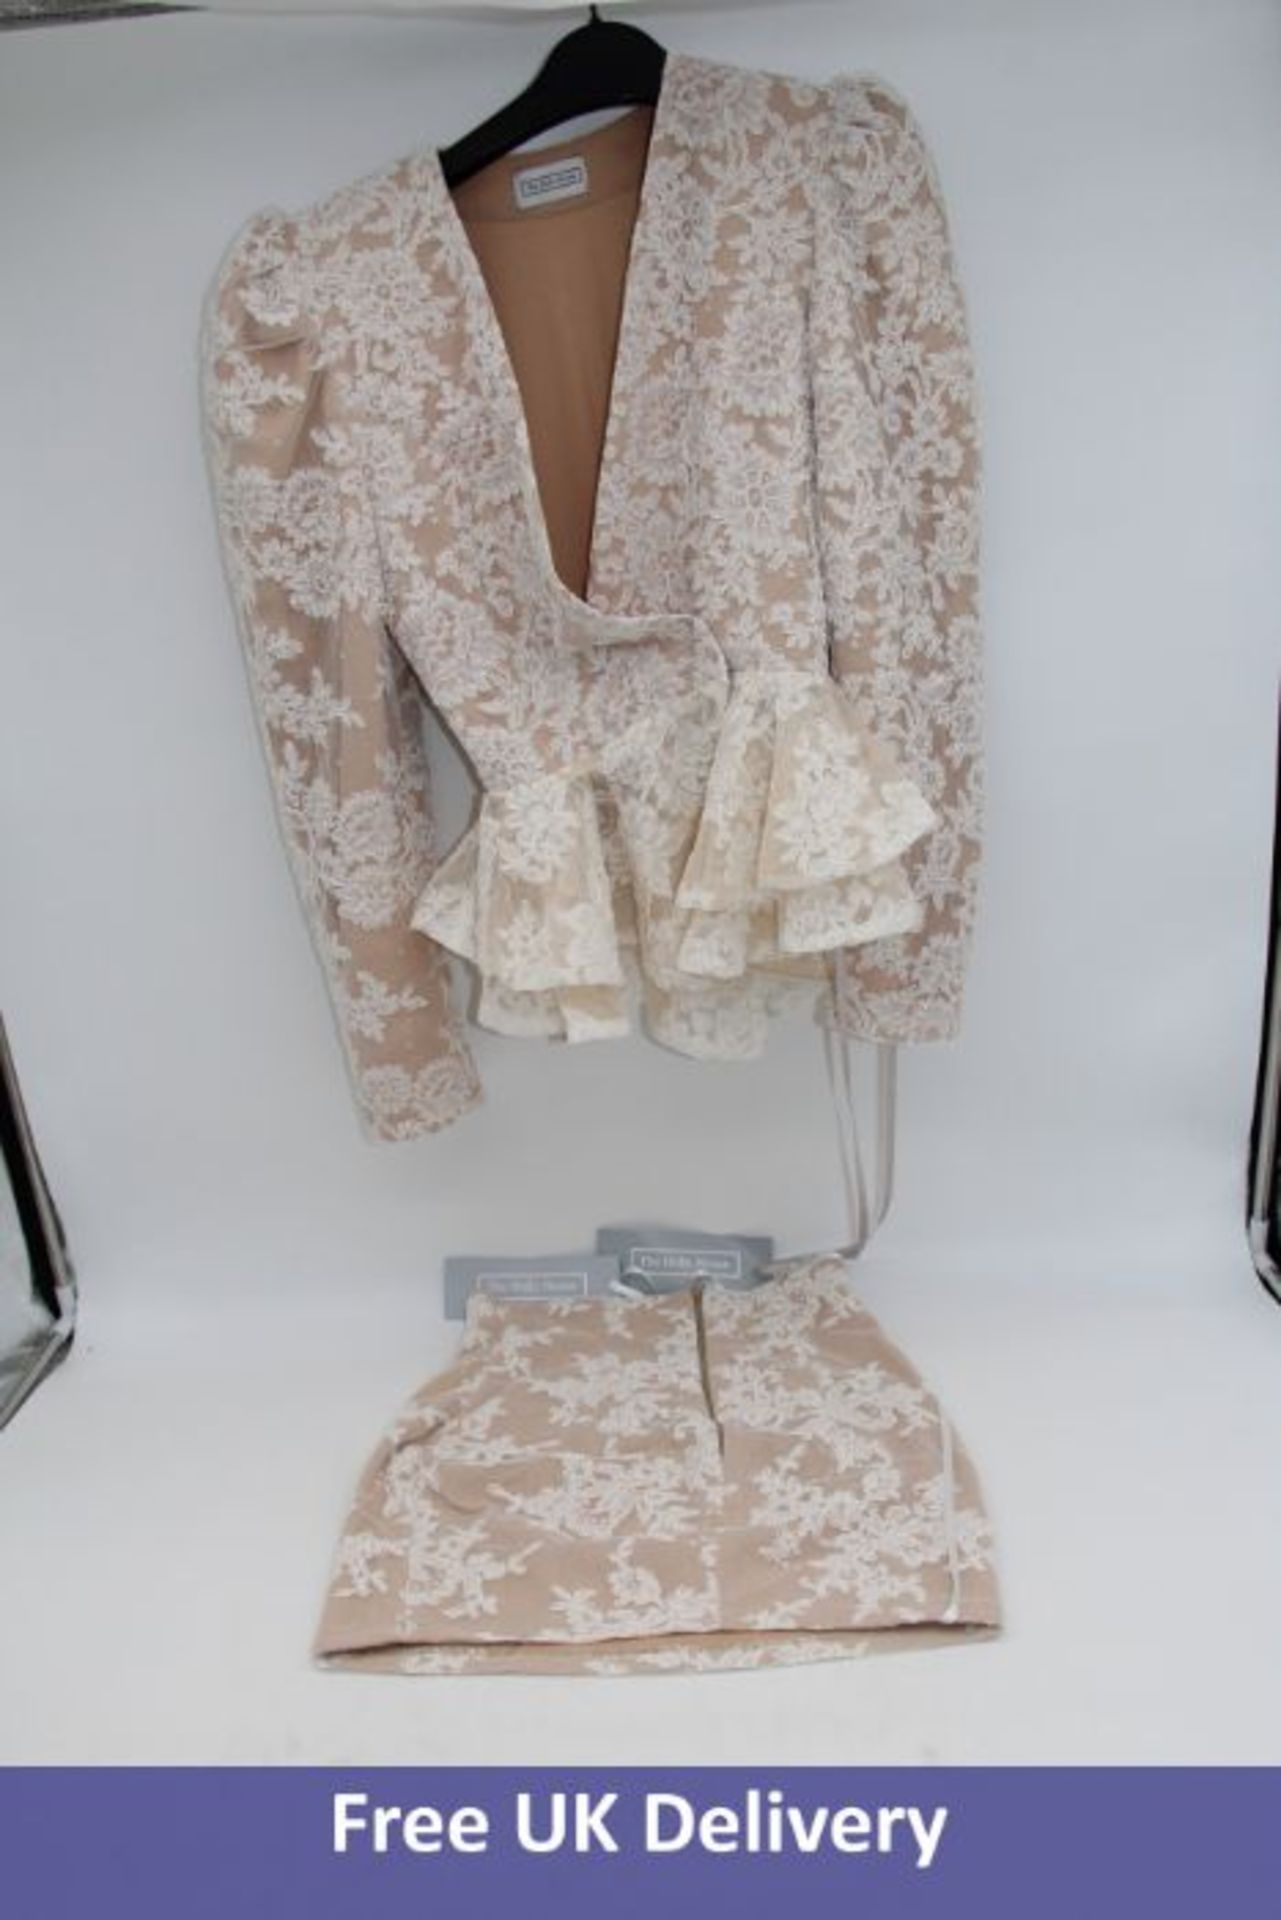 The Dolls House Matching Libby Jacket And Mini Skirt, White Lace, Small